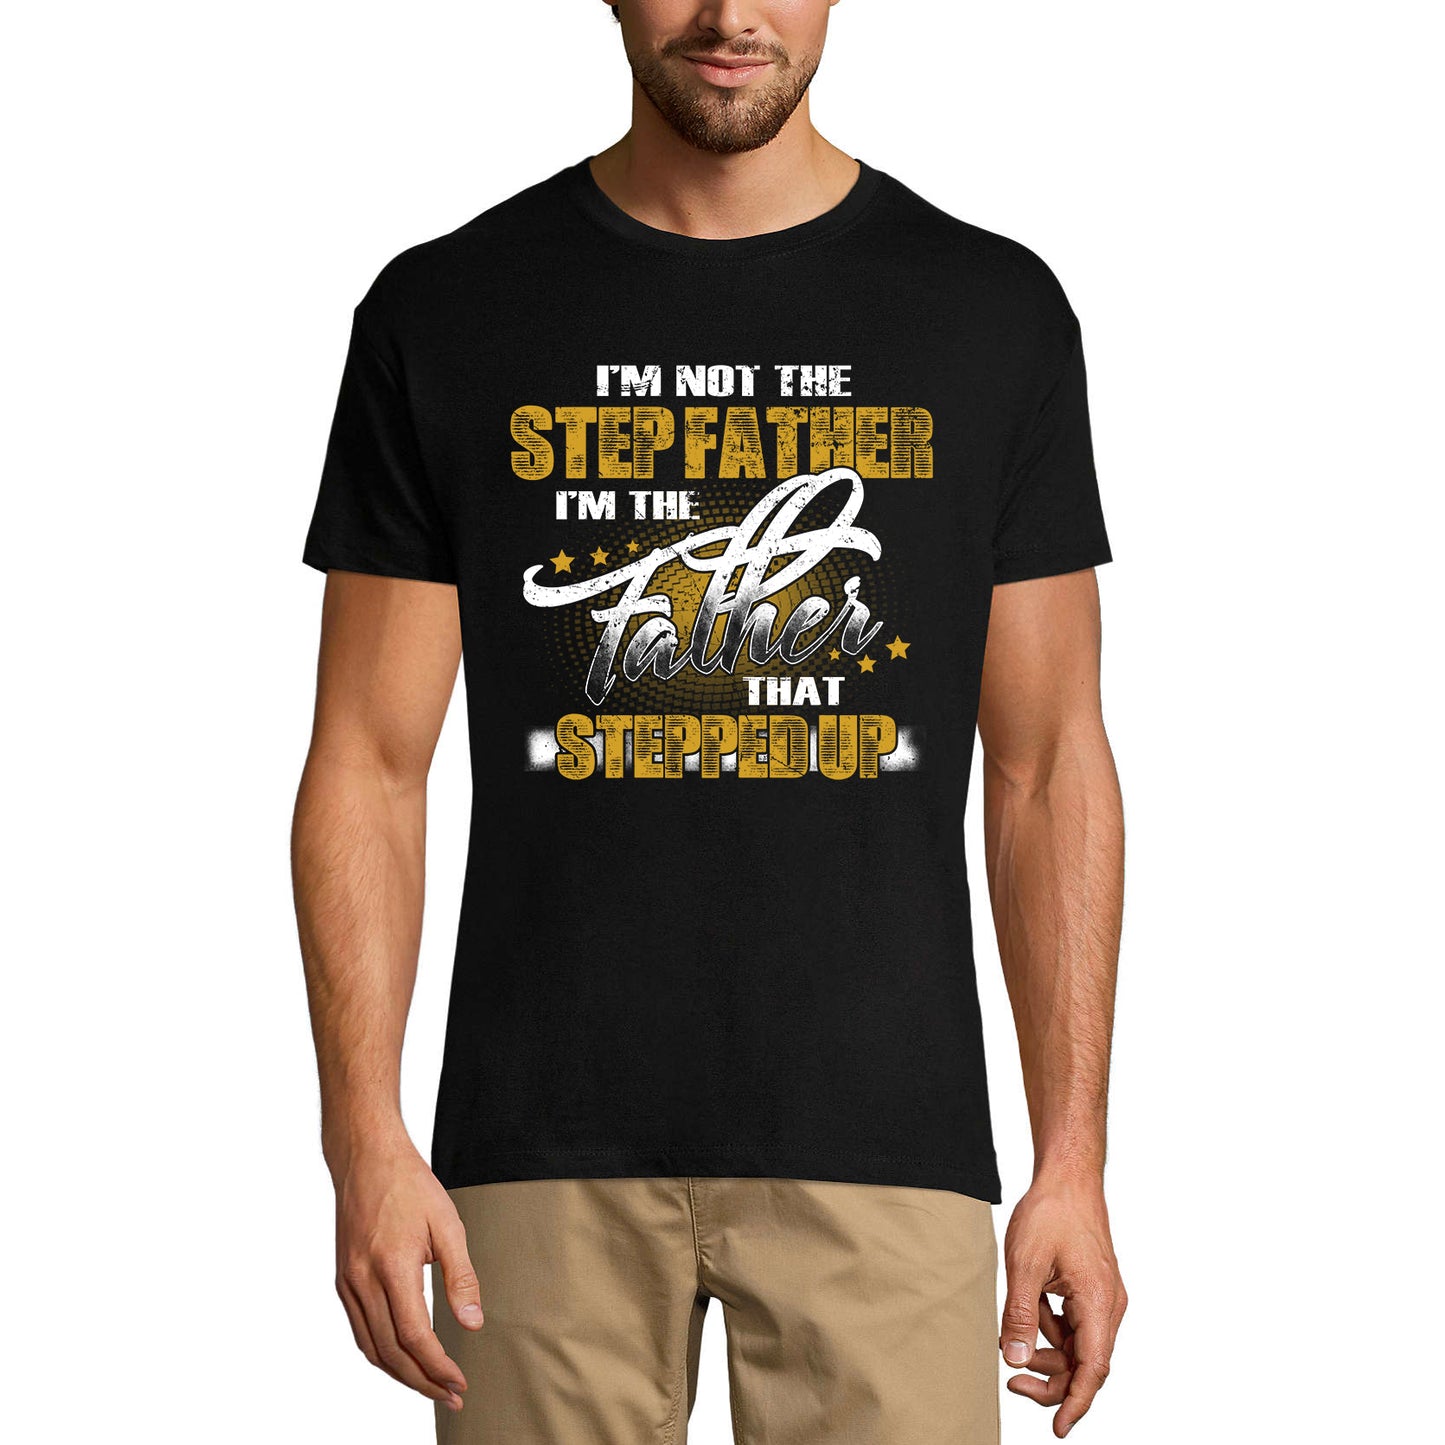 ULTRABASIC Men's Graphic T-Shirt I'm The Father That Stepped Up - Funny Shirt